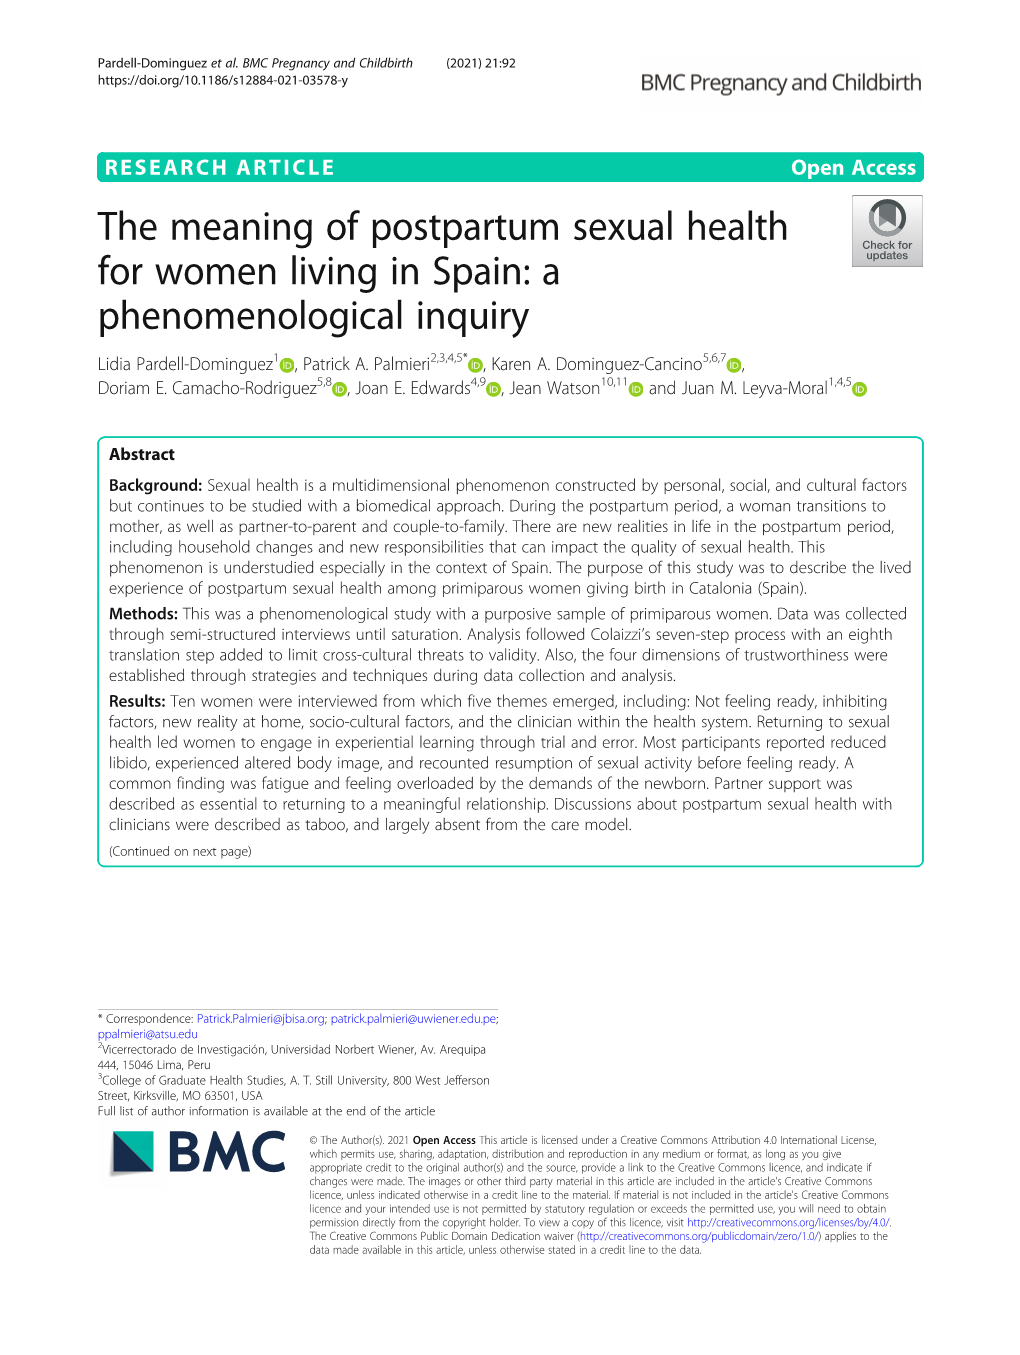 The Meaning of Postpartum Sexual Health for Women Living in Spain: a Phenomenological Inquiry Lidia Pardell-Dominguez1 , Patrick A